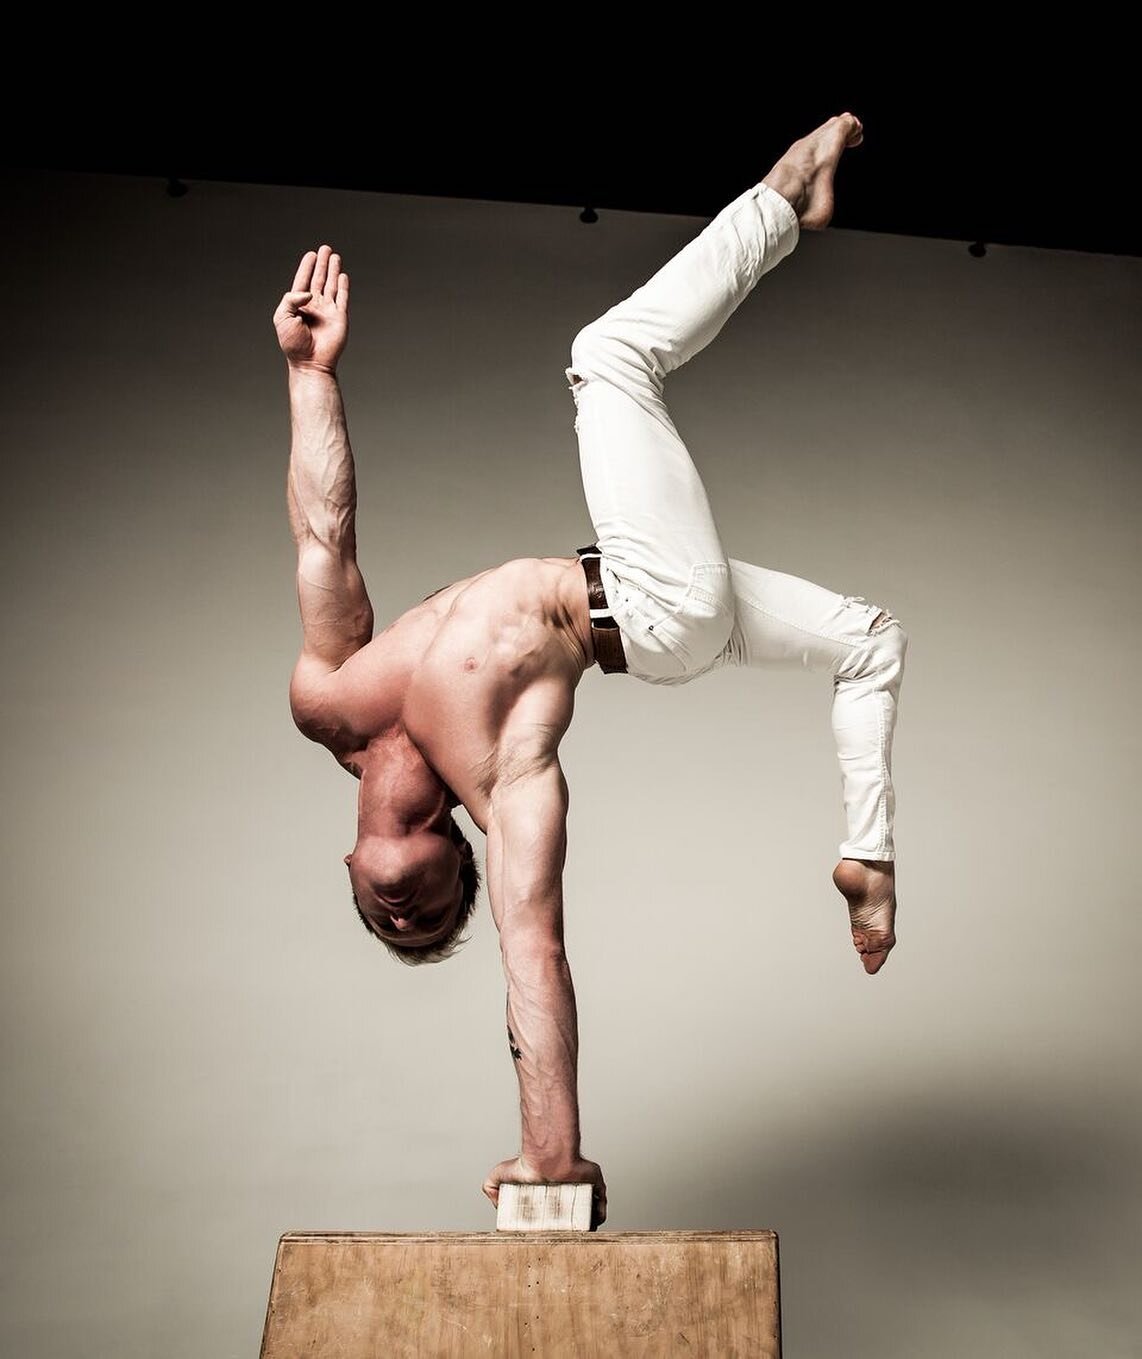 We&rsquo;re excited to announce that @andrii_bondarenko will be leading a handstand workshop on September 13 from 5-7p at the Dojo. Sign up is live on MindBody.